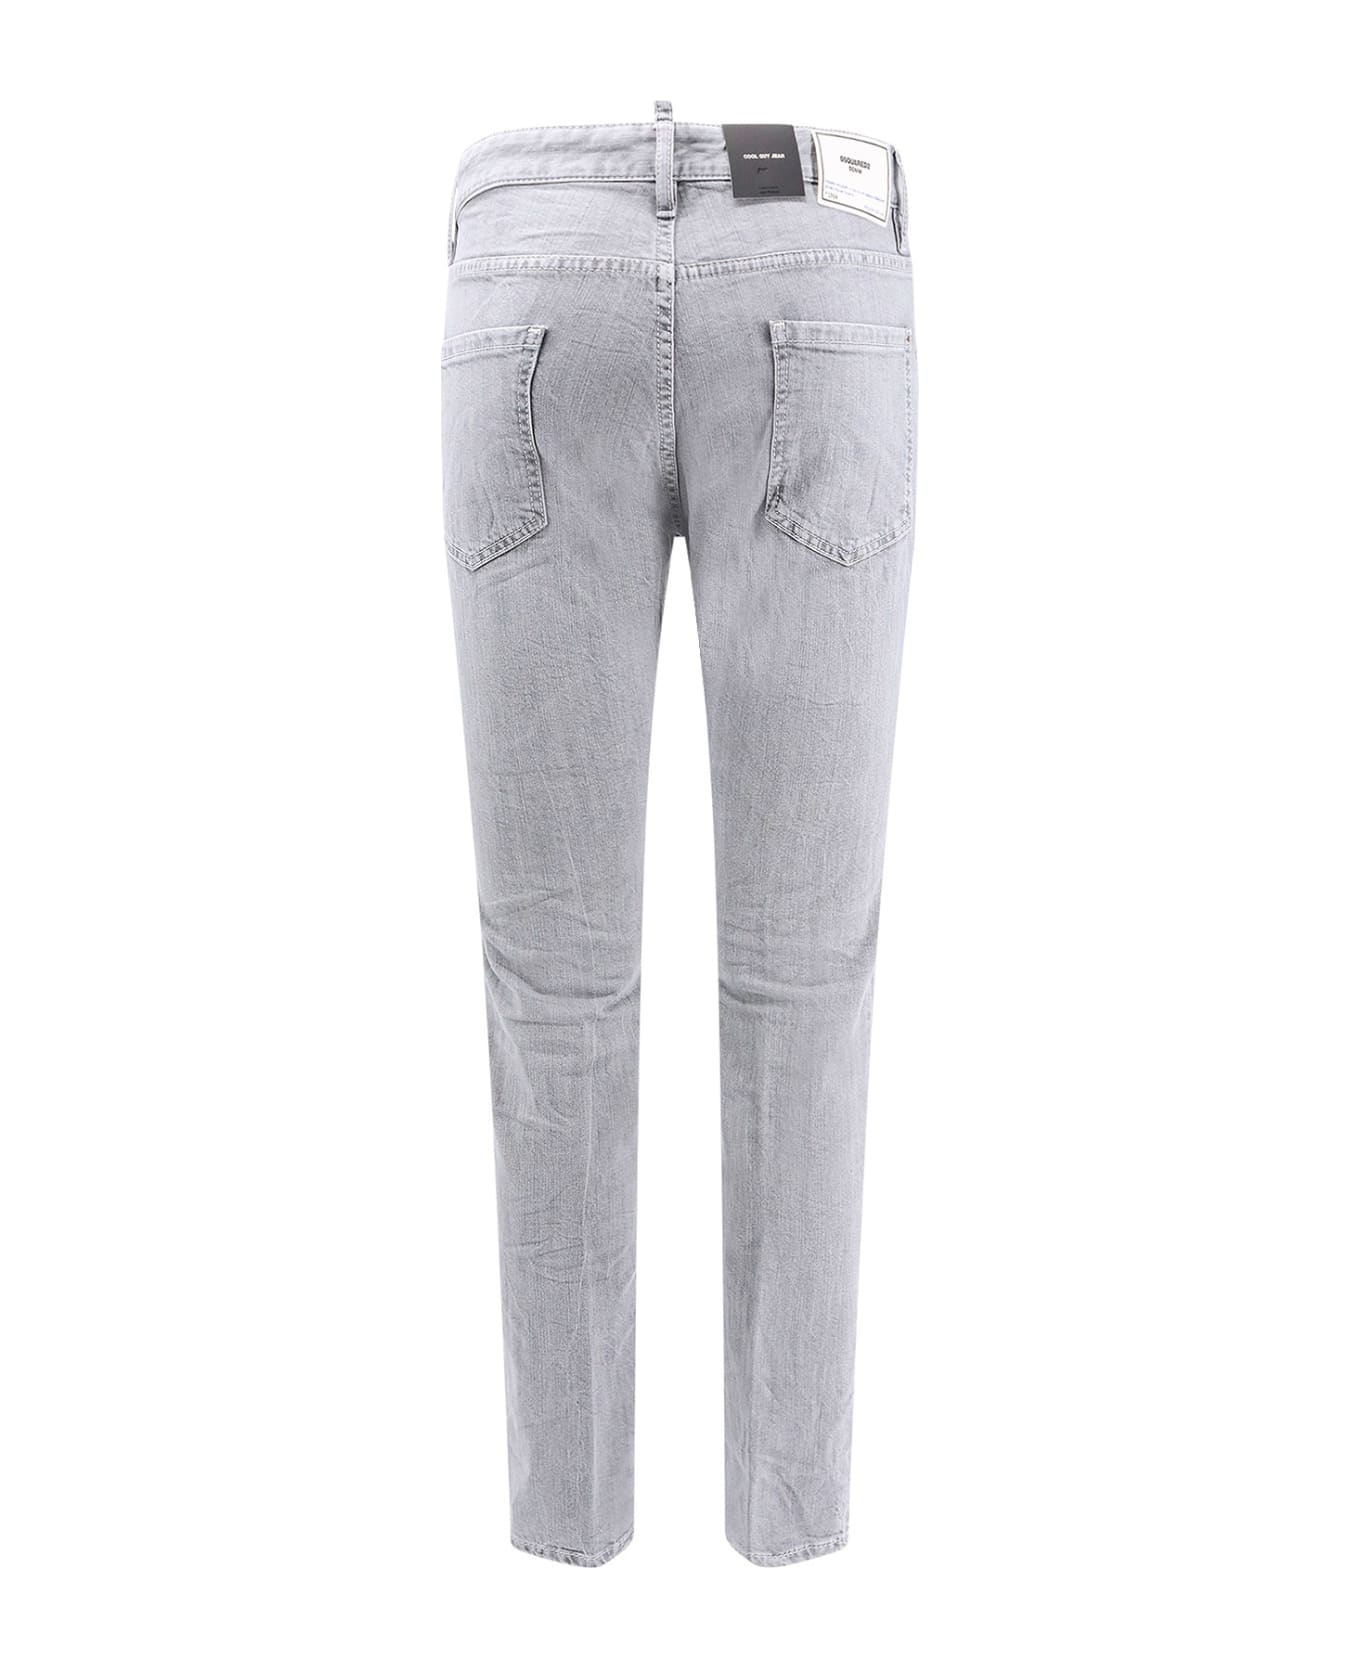 Dsquared2 Cool Guy Jean Trouser - Grey ボトムス